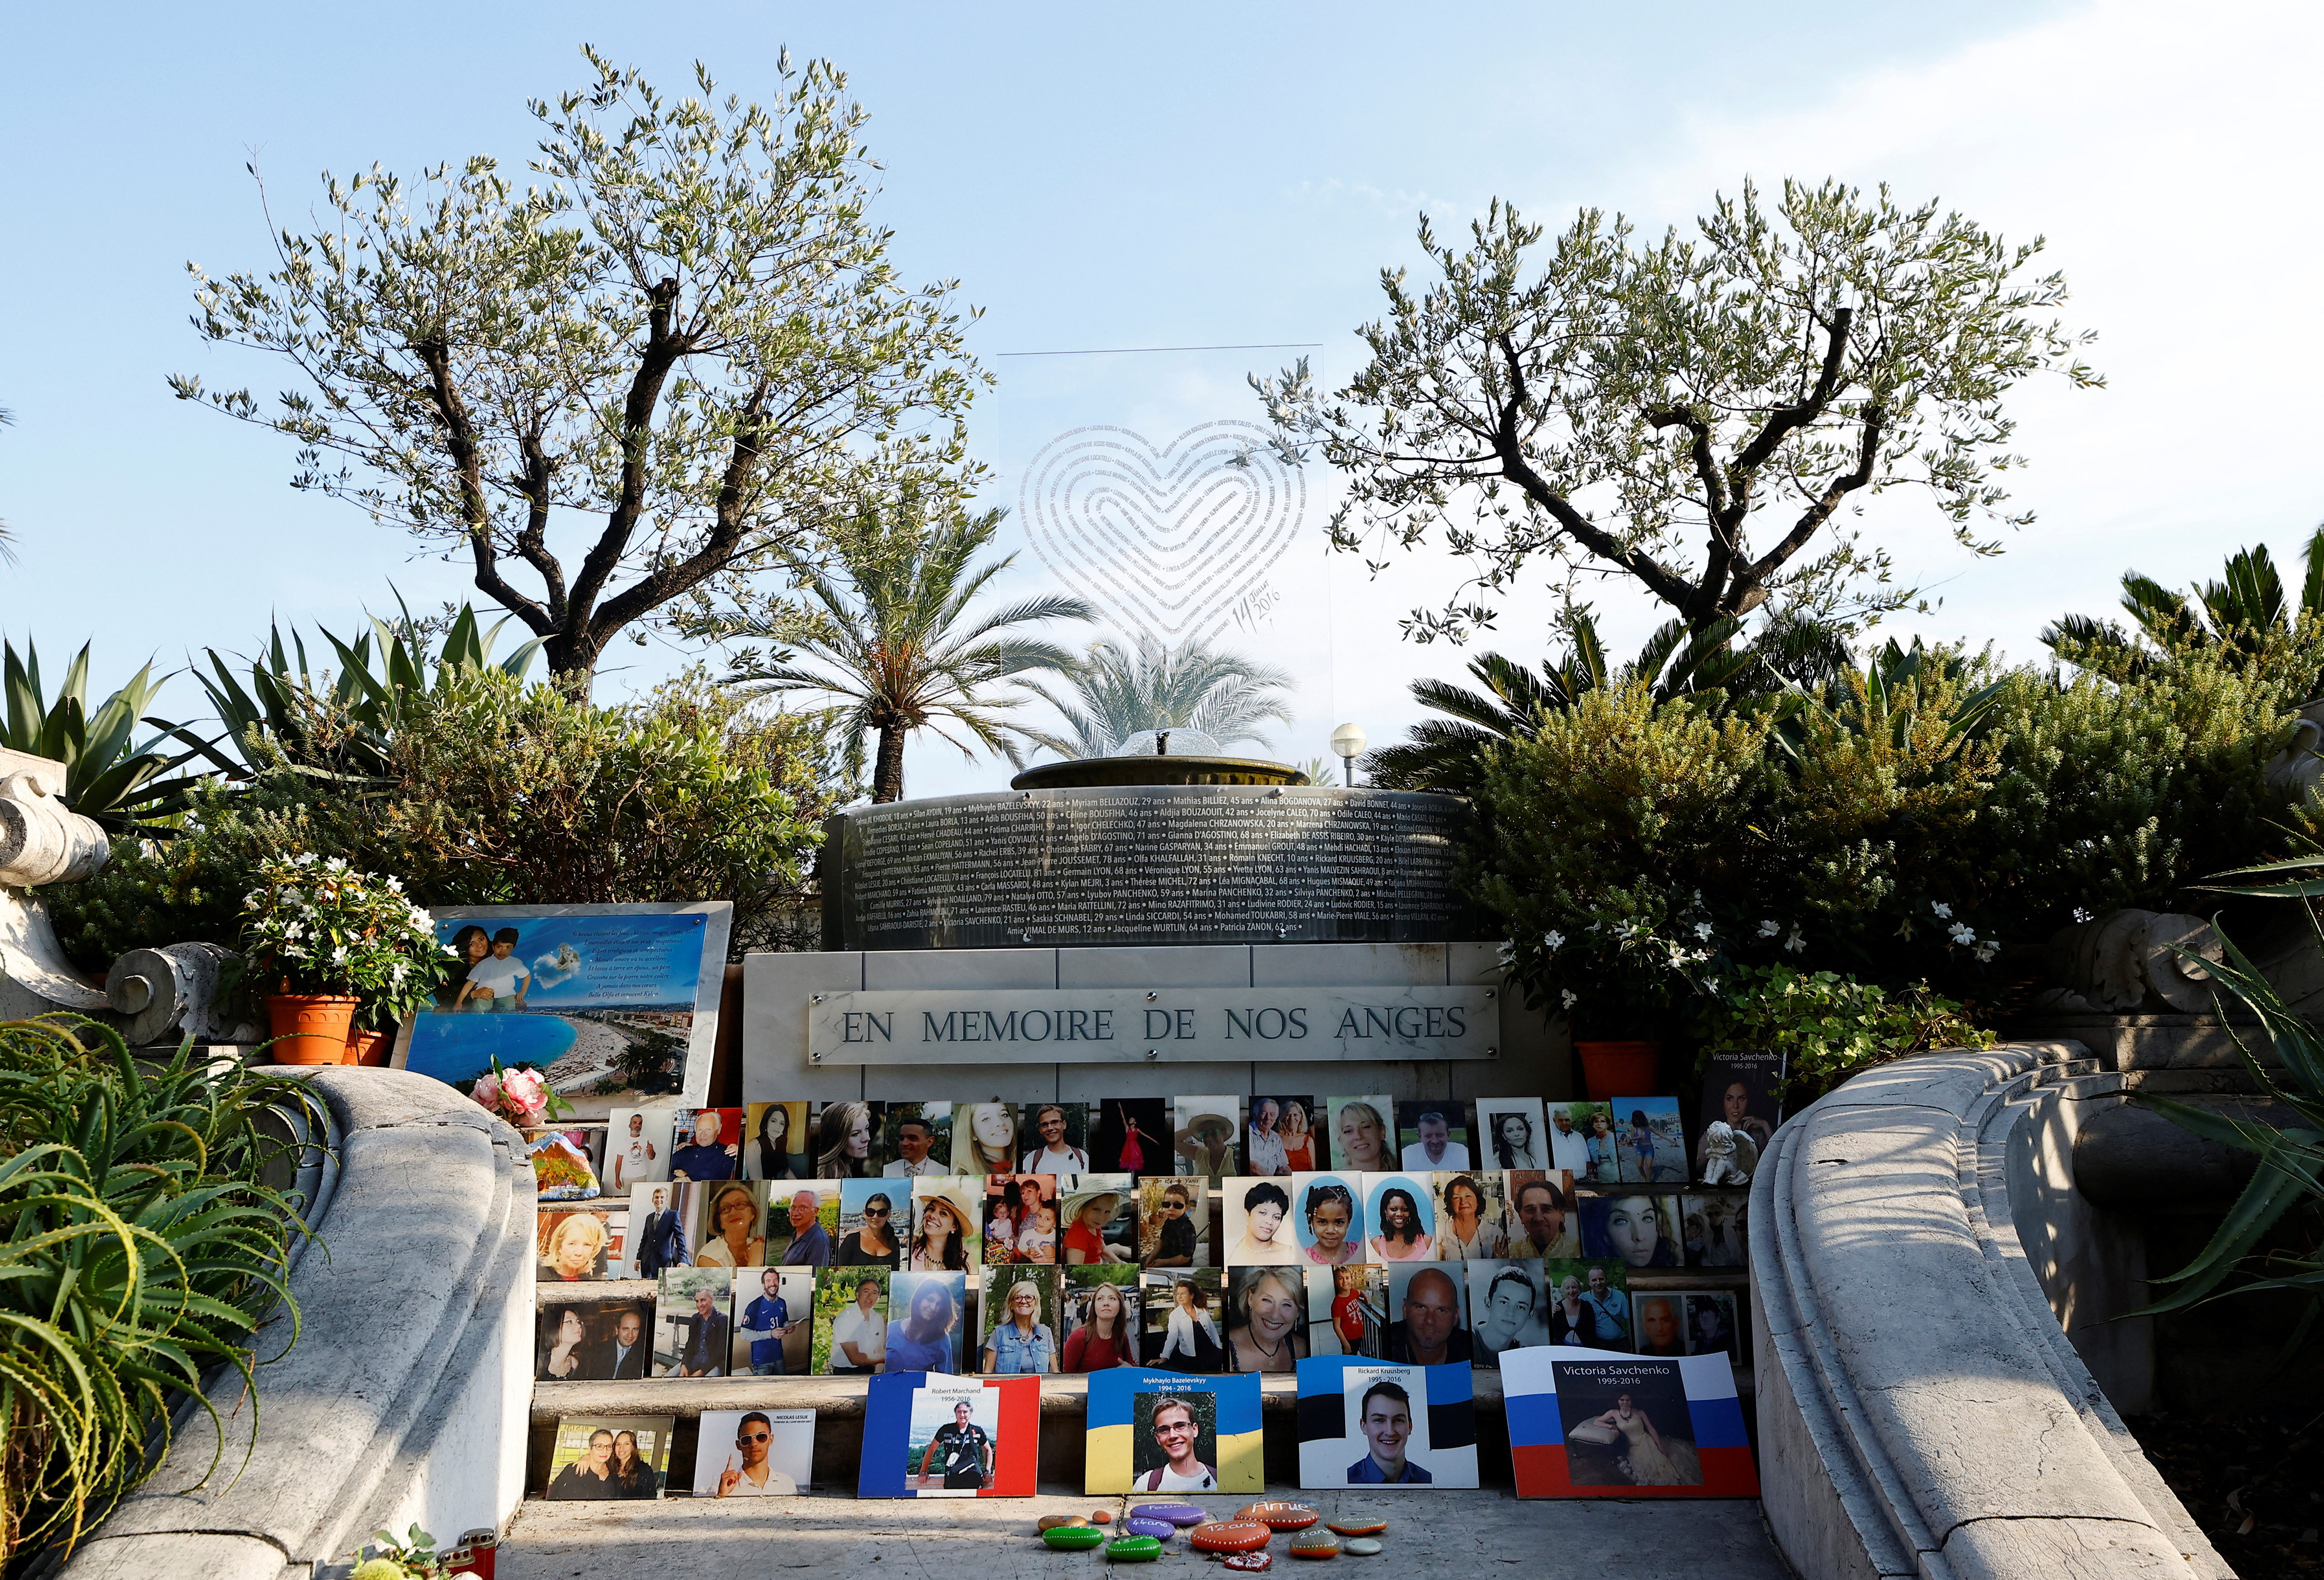 Names of the 86 victims of the July 14, 2016 truck attacks are seen on a memorial in Nice